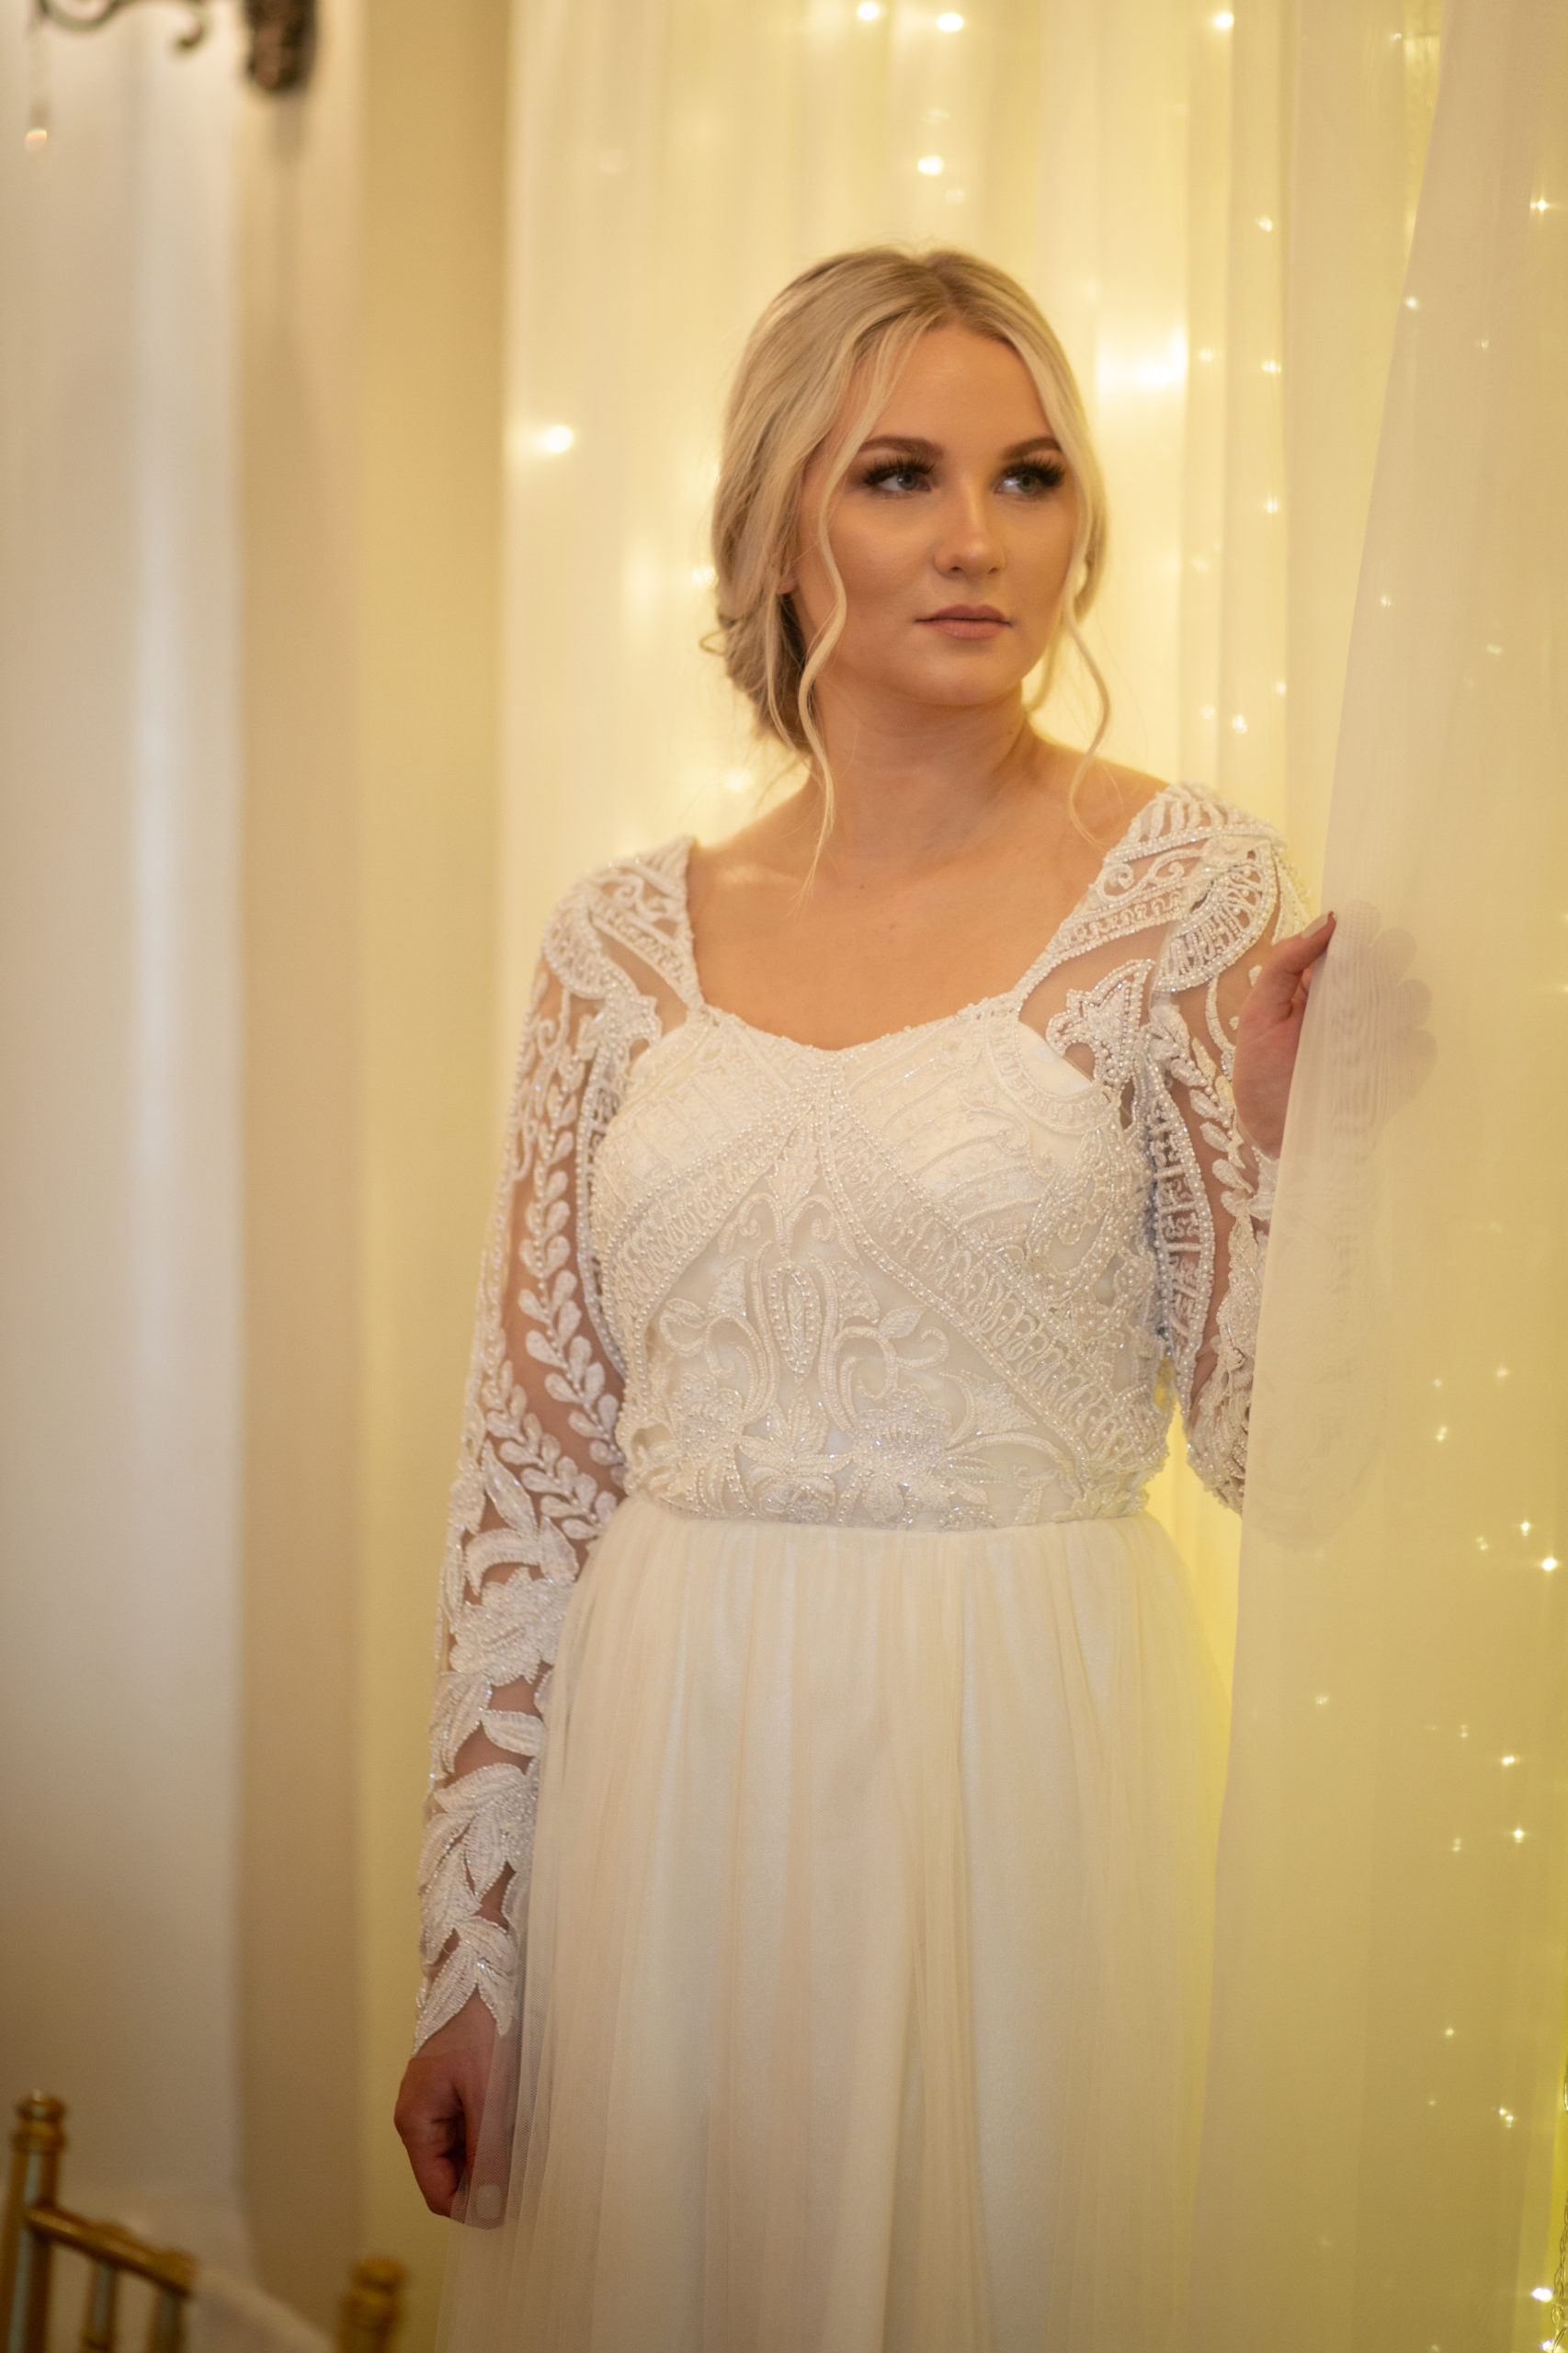 Boho bridal gown beaded a-line bridal gown, lace and tulle, wholesale wedding dress, long lace sleeves, simple lace dress